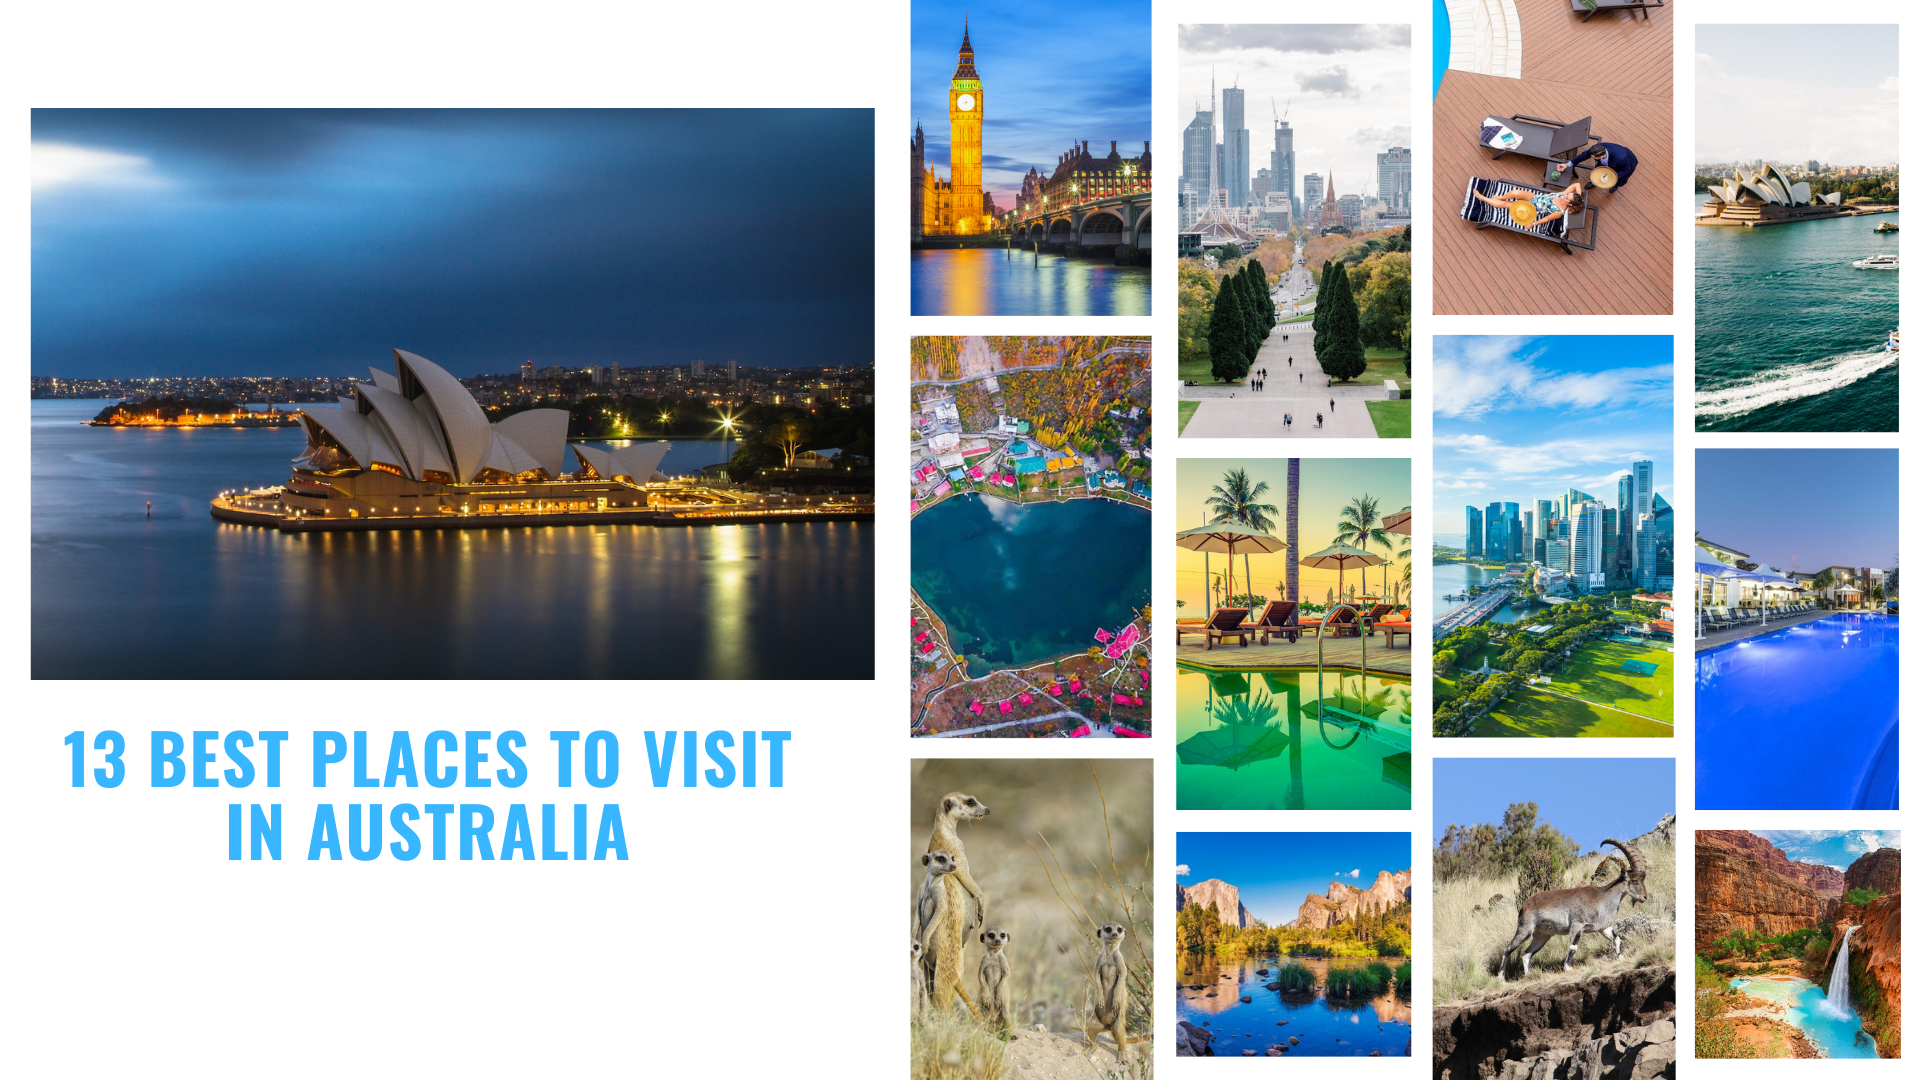 13 best places to visit in Australia